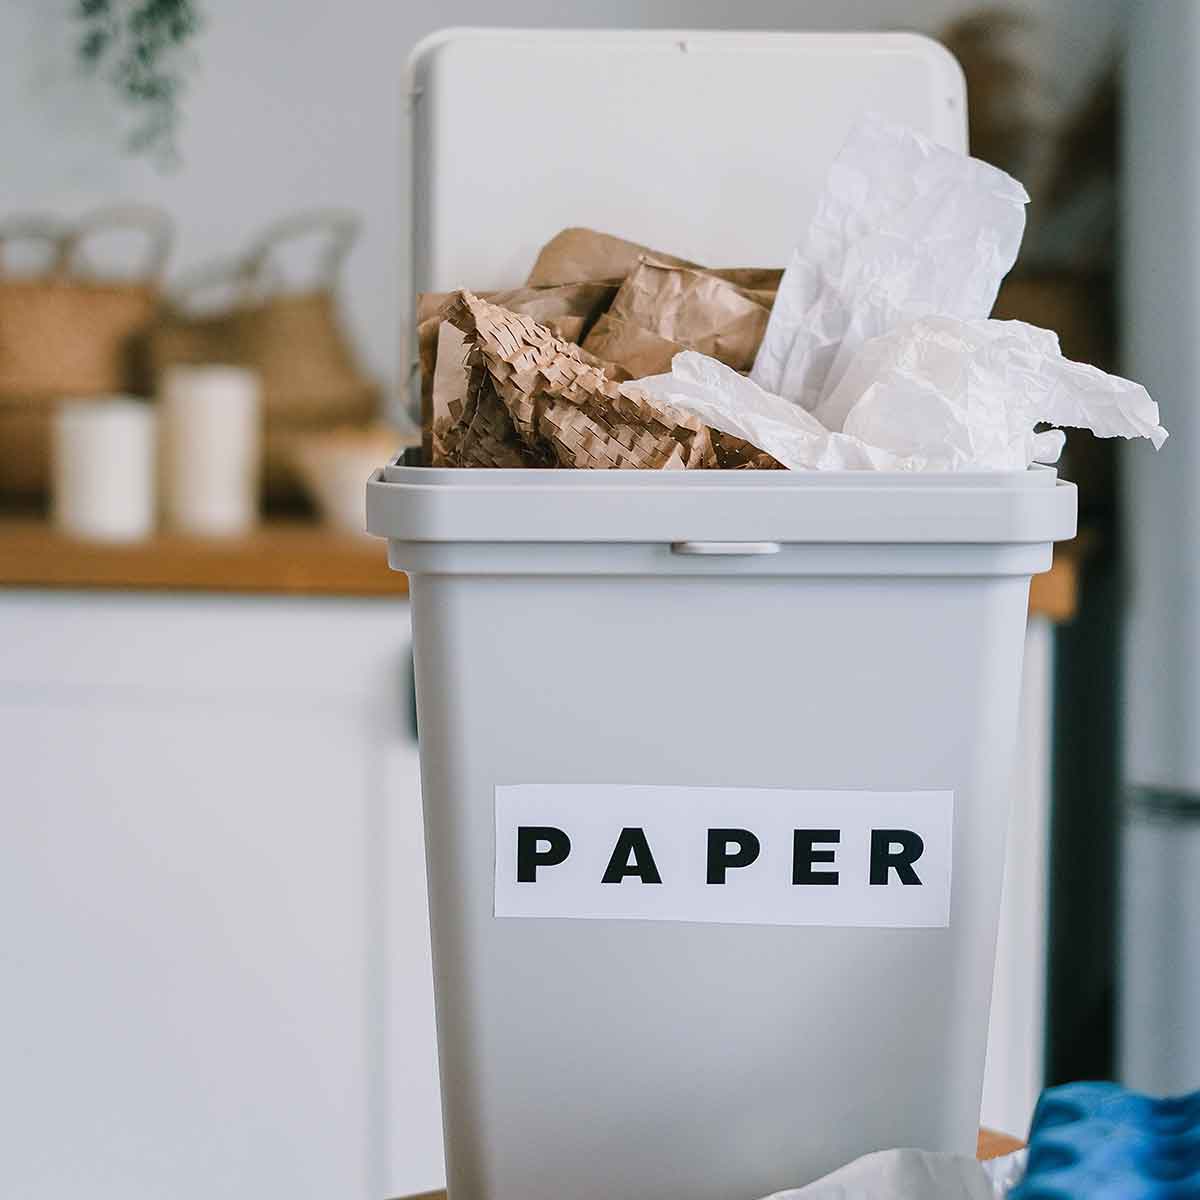 How to Recycle Paper?